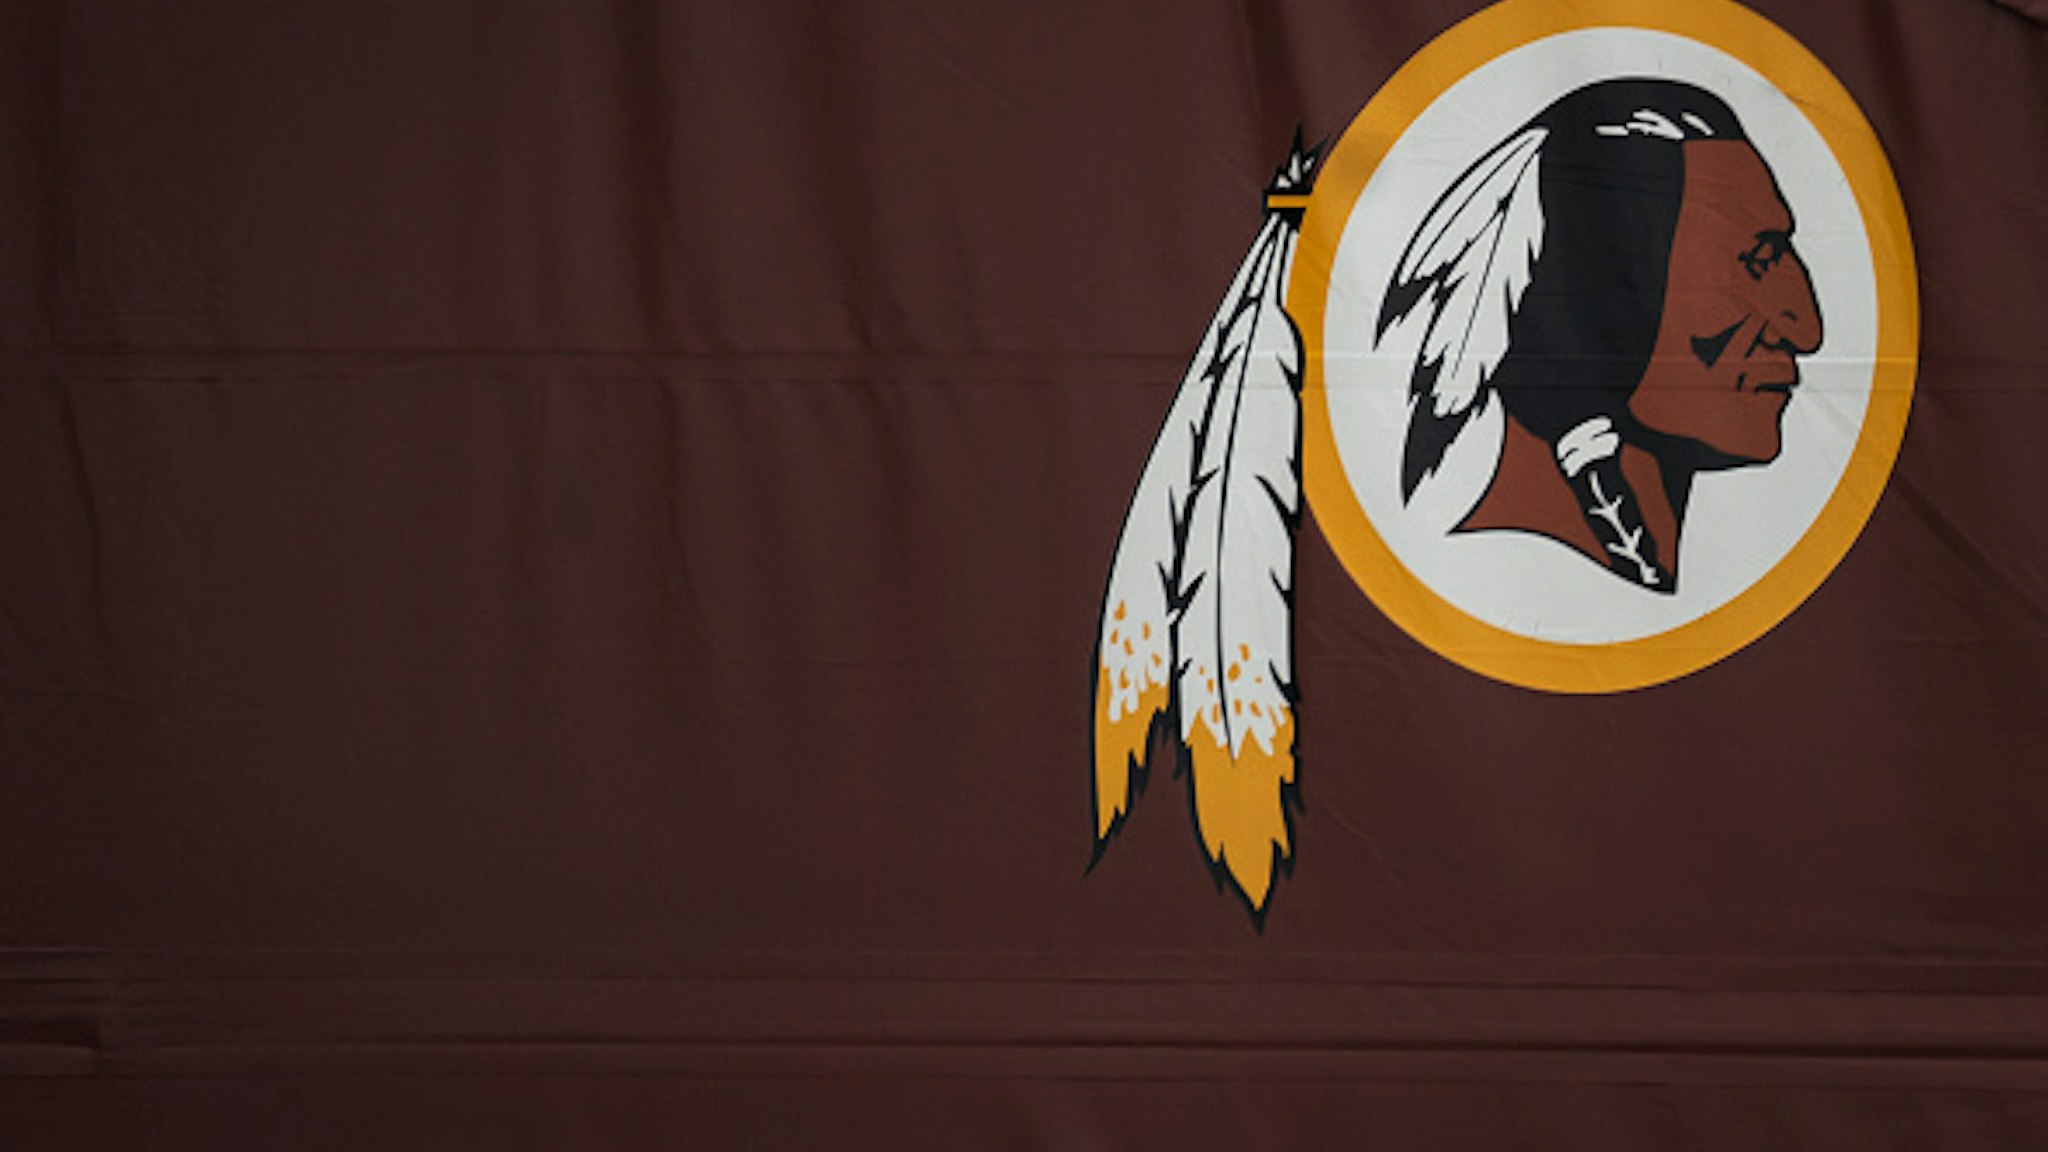 LANDOVER, MD - JULY 07: A Washington Redskins logo is seen on the outside of FedEx Field on July 7, 2020 in Landover, Maryland. After receiving recent pressure from sponsors and retailers, the NFL franchise is considering a name change to replace Redskins. The term "redskin" is a dictionary-defined racial slur for Native Americans.